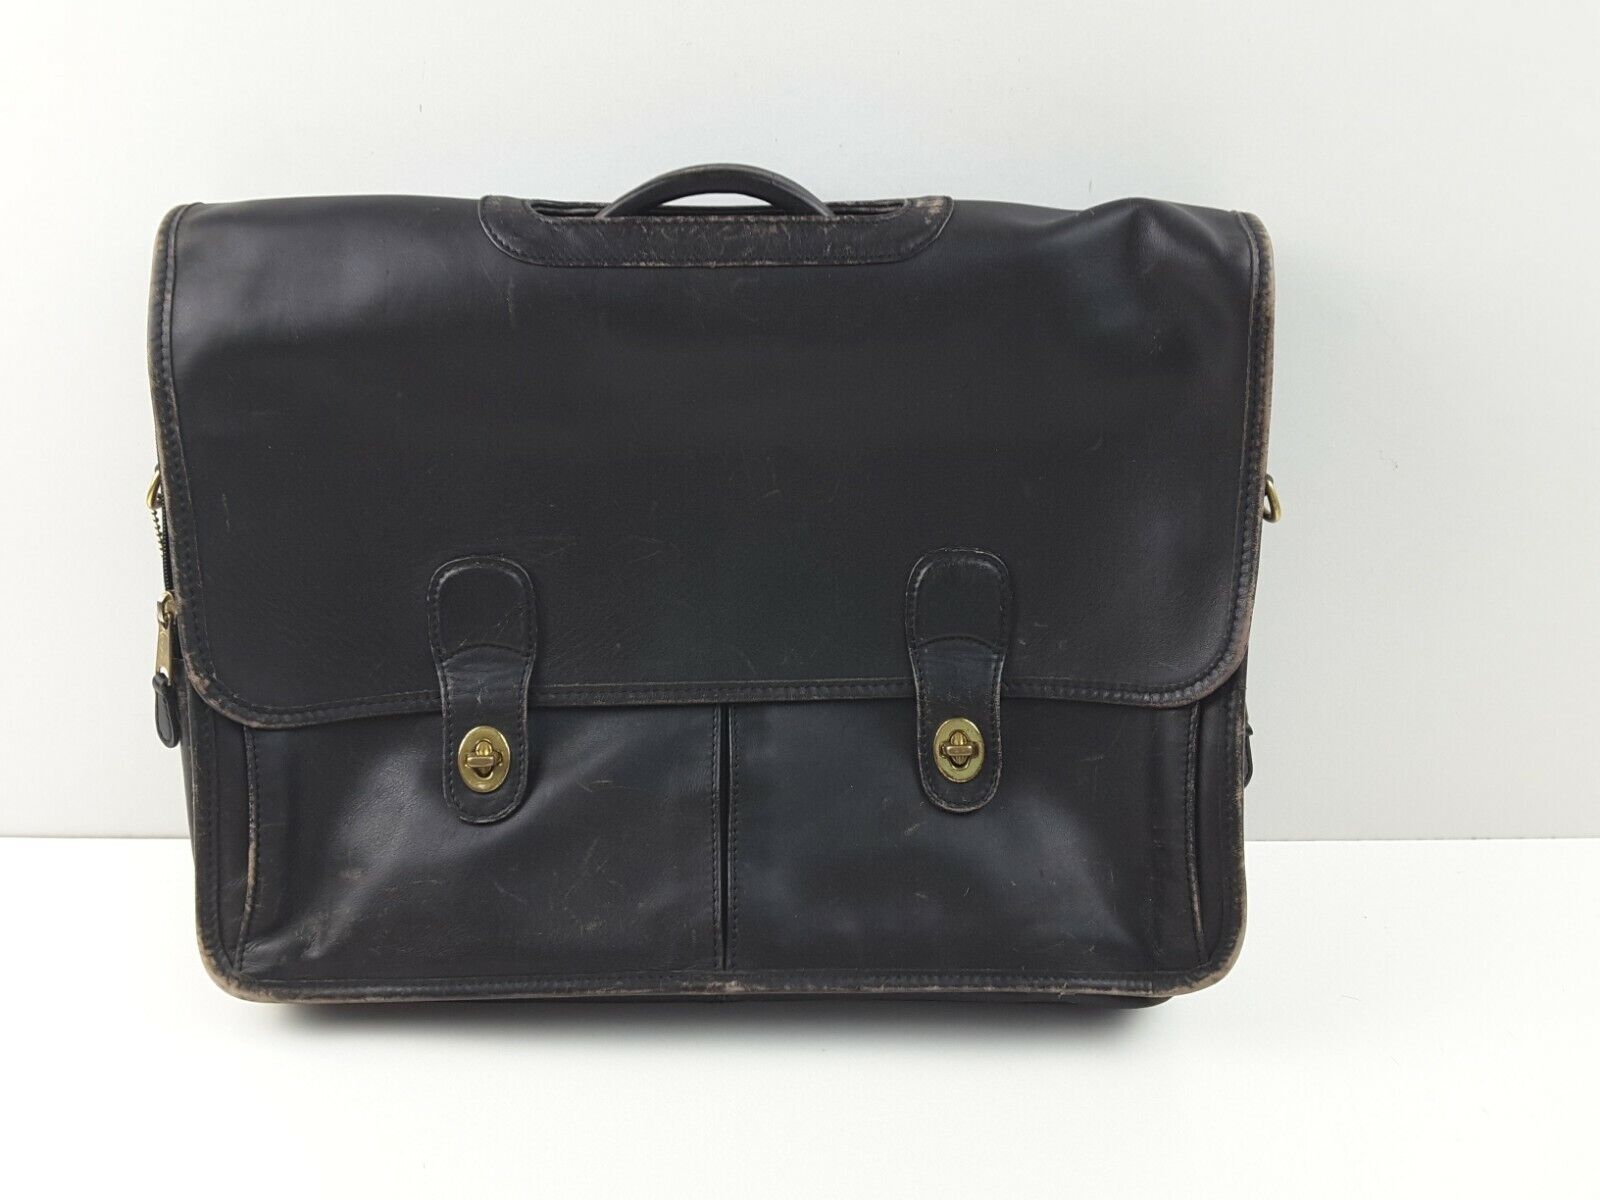 Vintage Coach Briefcase Laptop Bag Black with Strap and Dustbag